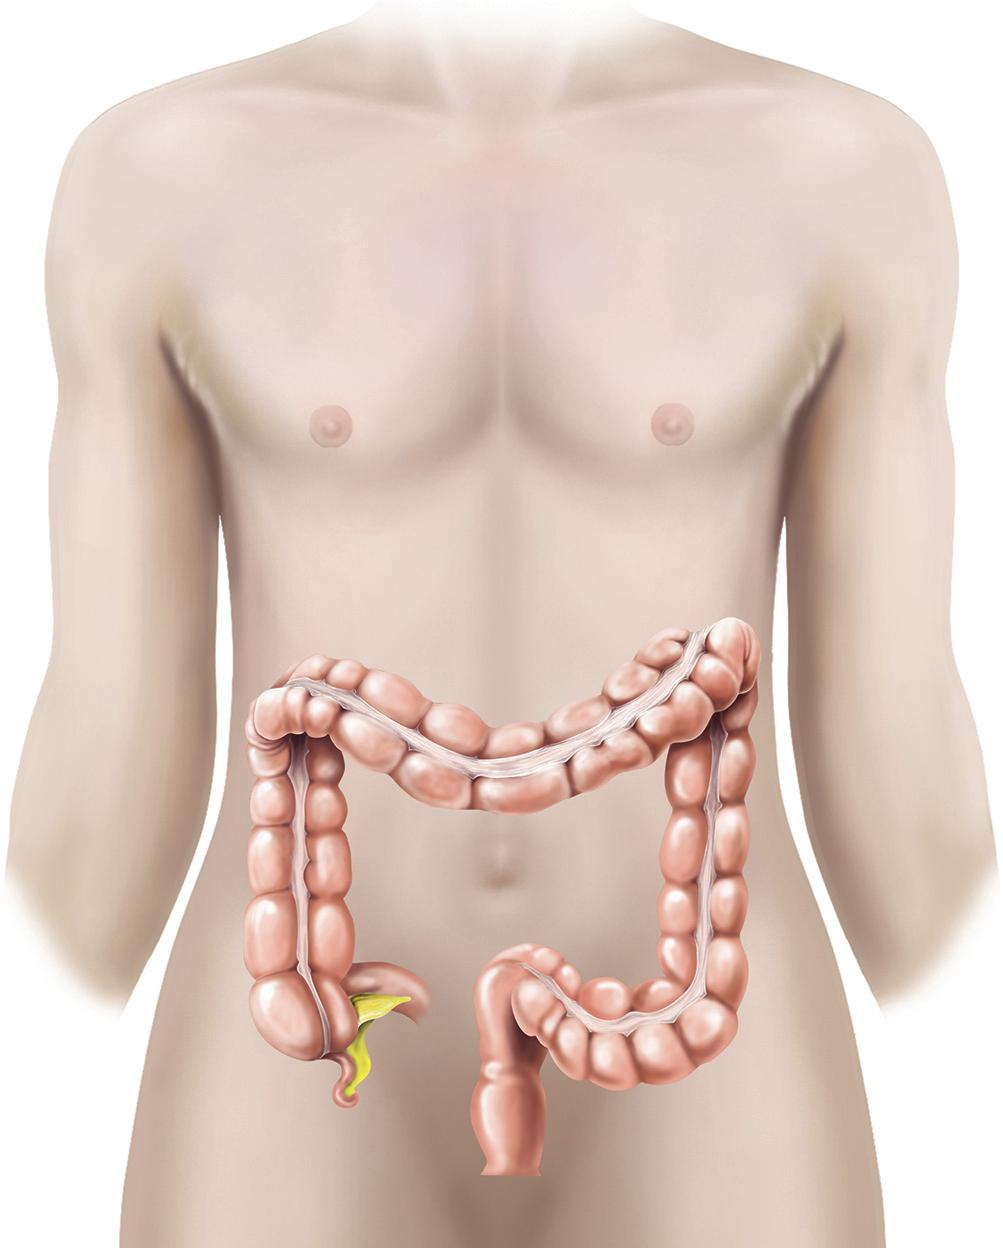 What is colon cancer? Colon cancer is a malignant growth that starts in the wall of your colon (large intestine). Colon cancer can cause your bowel habits to change.